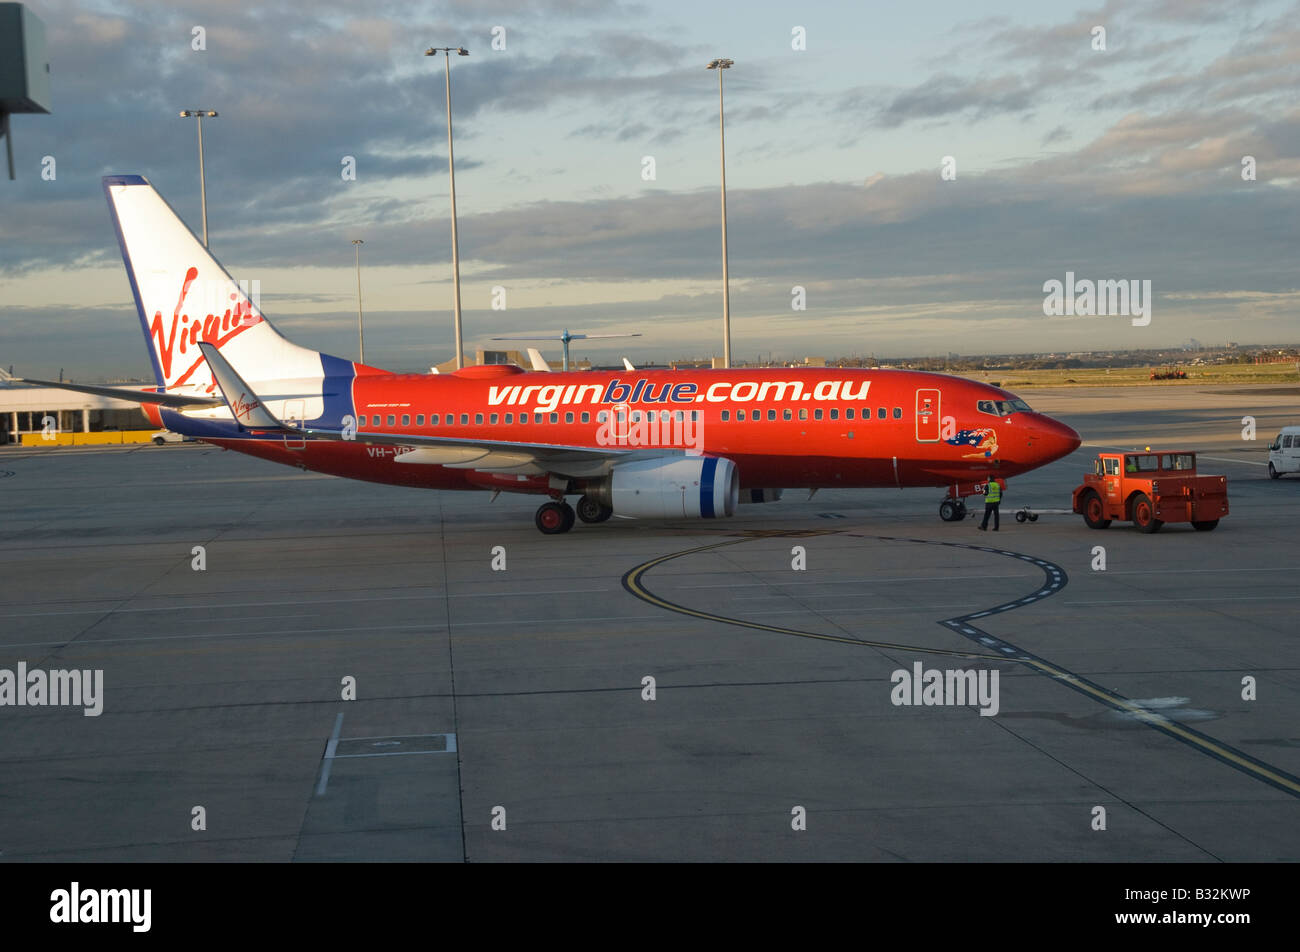 A Virgin Blue aircraft preparing for departure at Melbourne Airport in Australia. Stock Photo